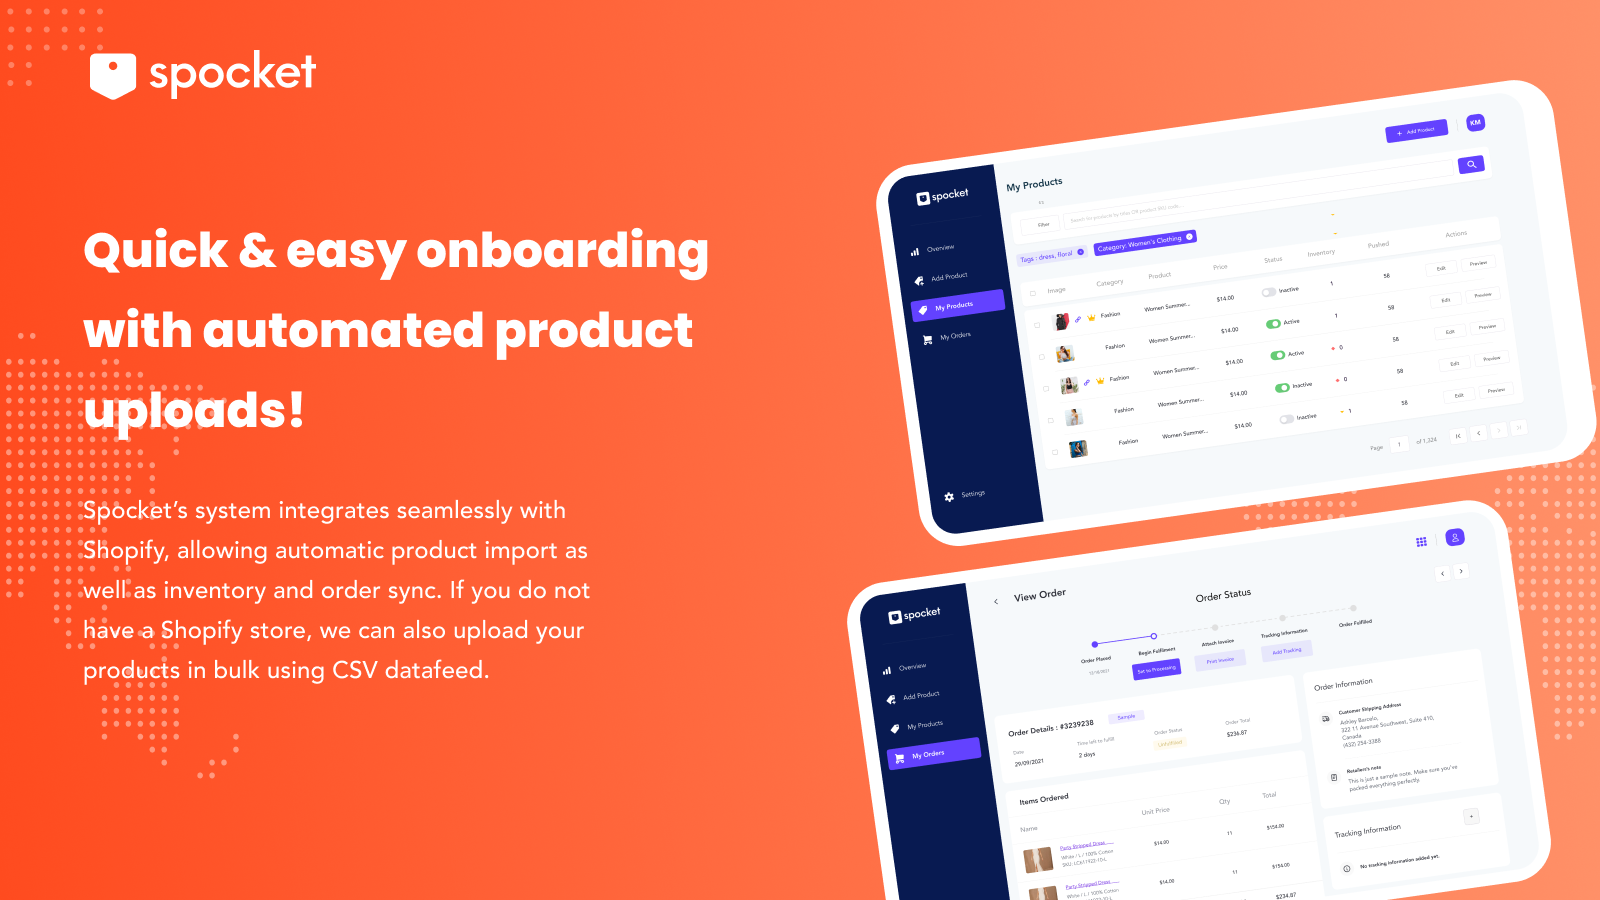 Quick & easy onboarding with automated product uploads!